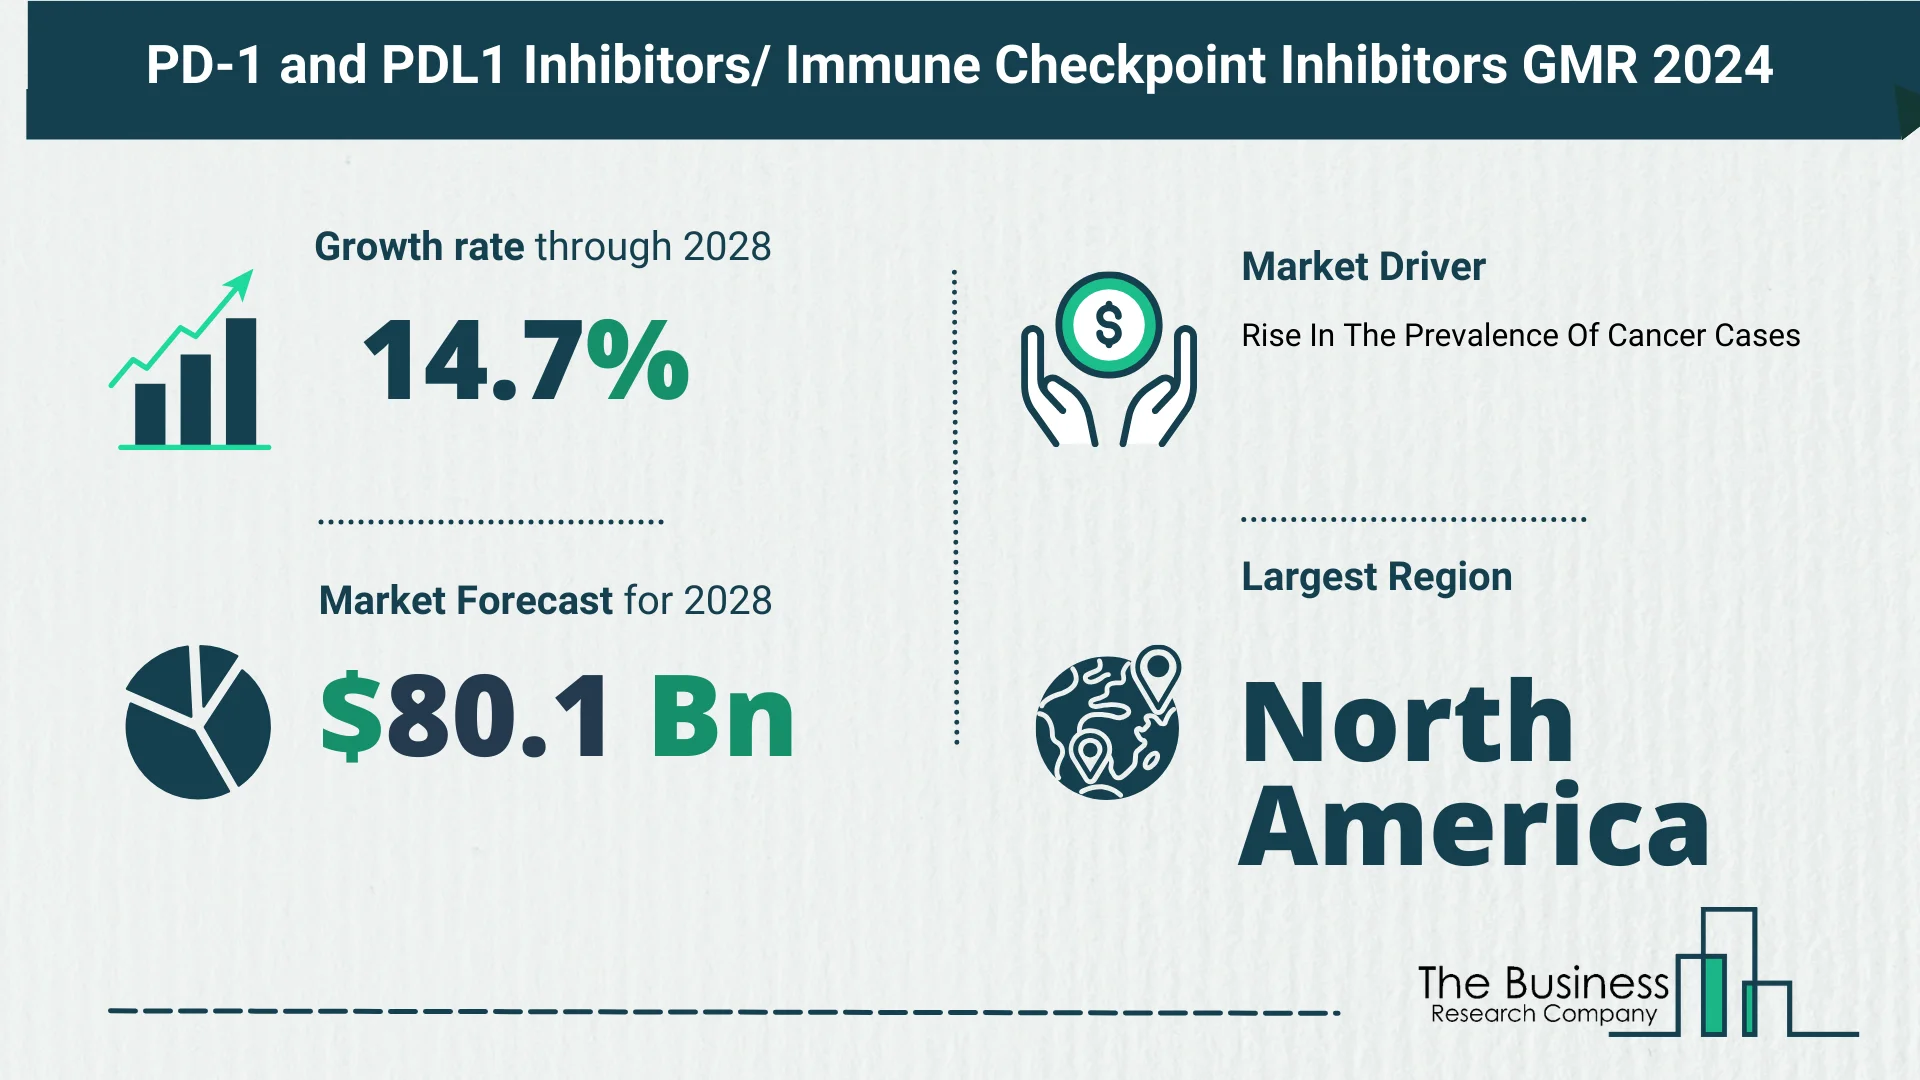 What’s The Growth Forecast For PD-1 and PDL1 Inhibitors or Immune Checkpoint Inhibitors Market Through 2024-2033?